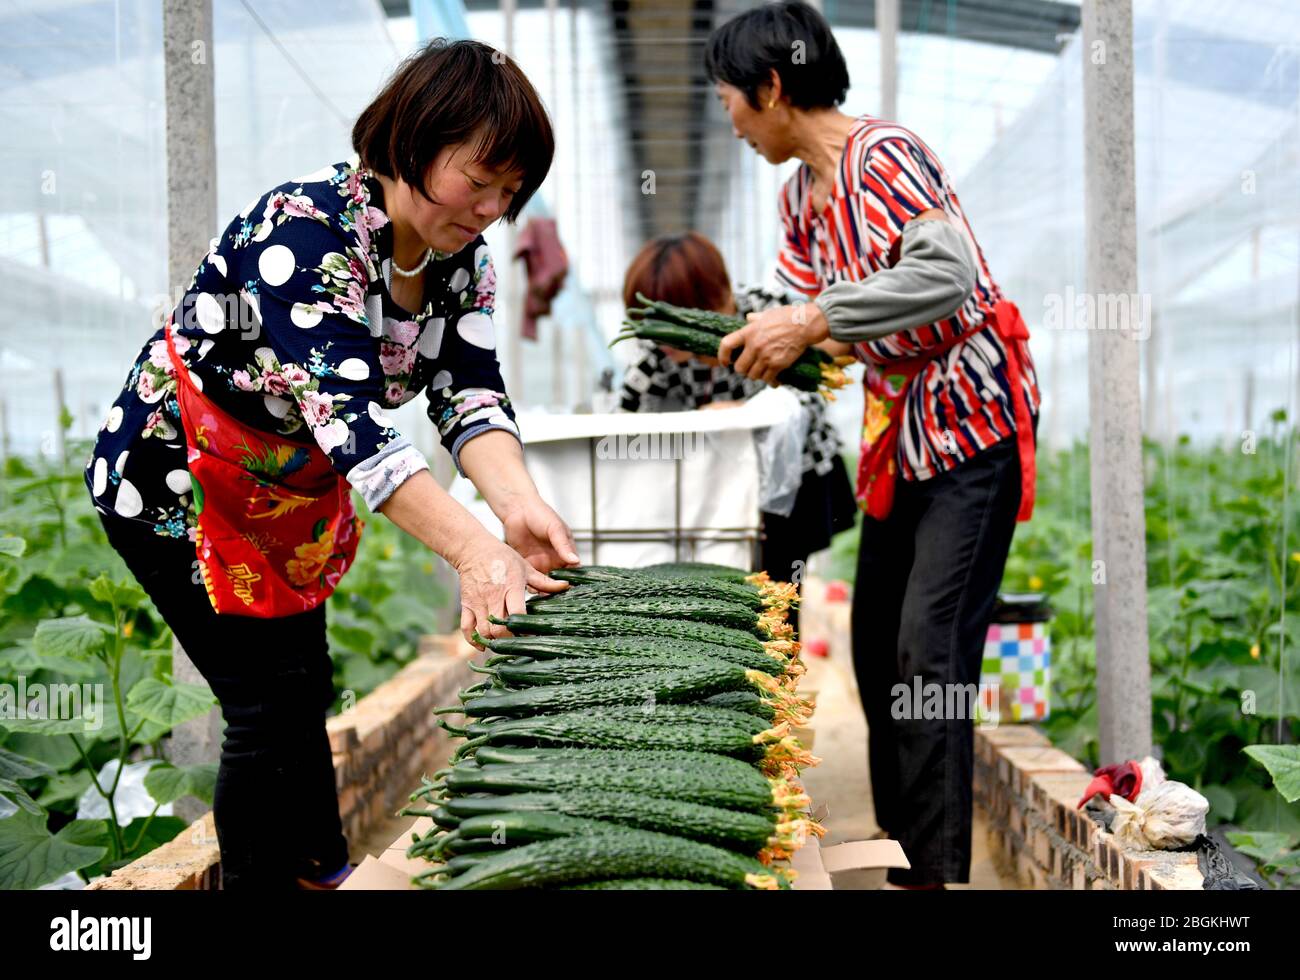 Farmers reap ripe cucumber, and pack and send them for both selling and meeting the demand of local government that providing adequate food supply for Stock Photo